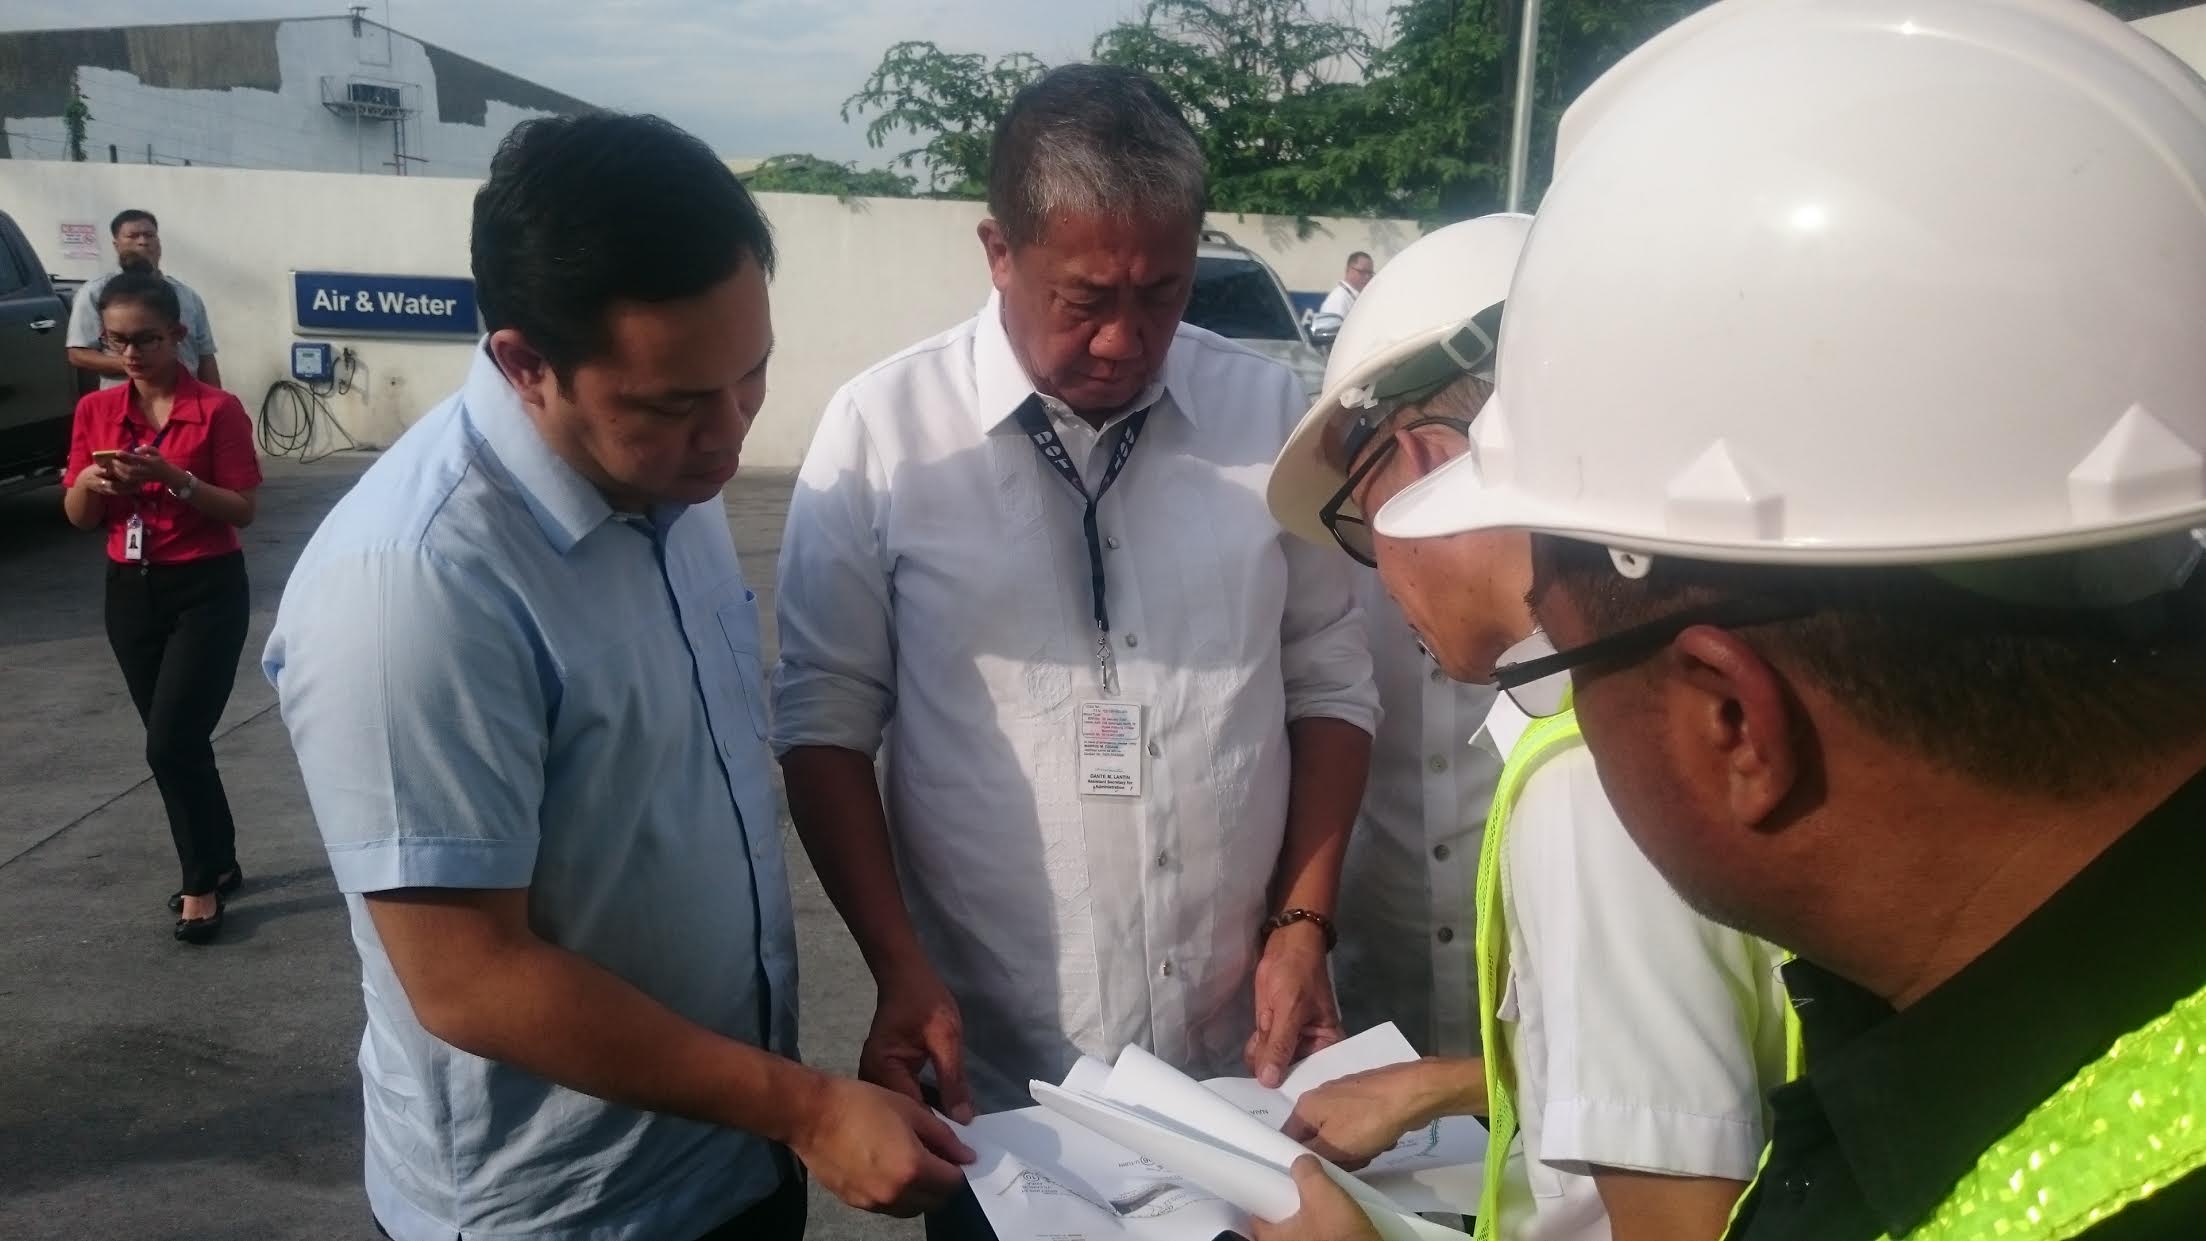 FINAL CHECKS. (from left) DPWH secretary Mark Villar and DOTr secretary Art Tugade in discussion with the project's engineers during a final inspection of the expressway held on September 20. Photo by Chris Schnabel/ Rappler 